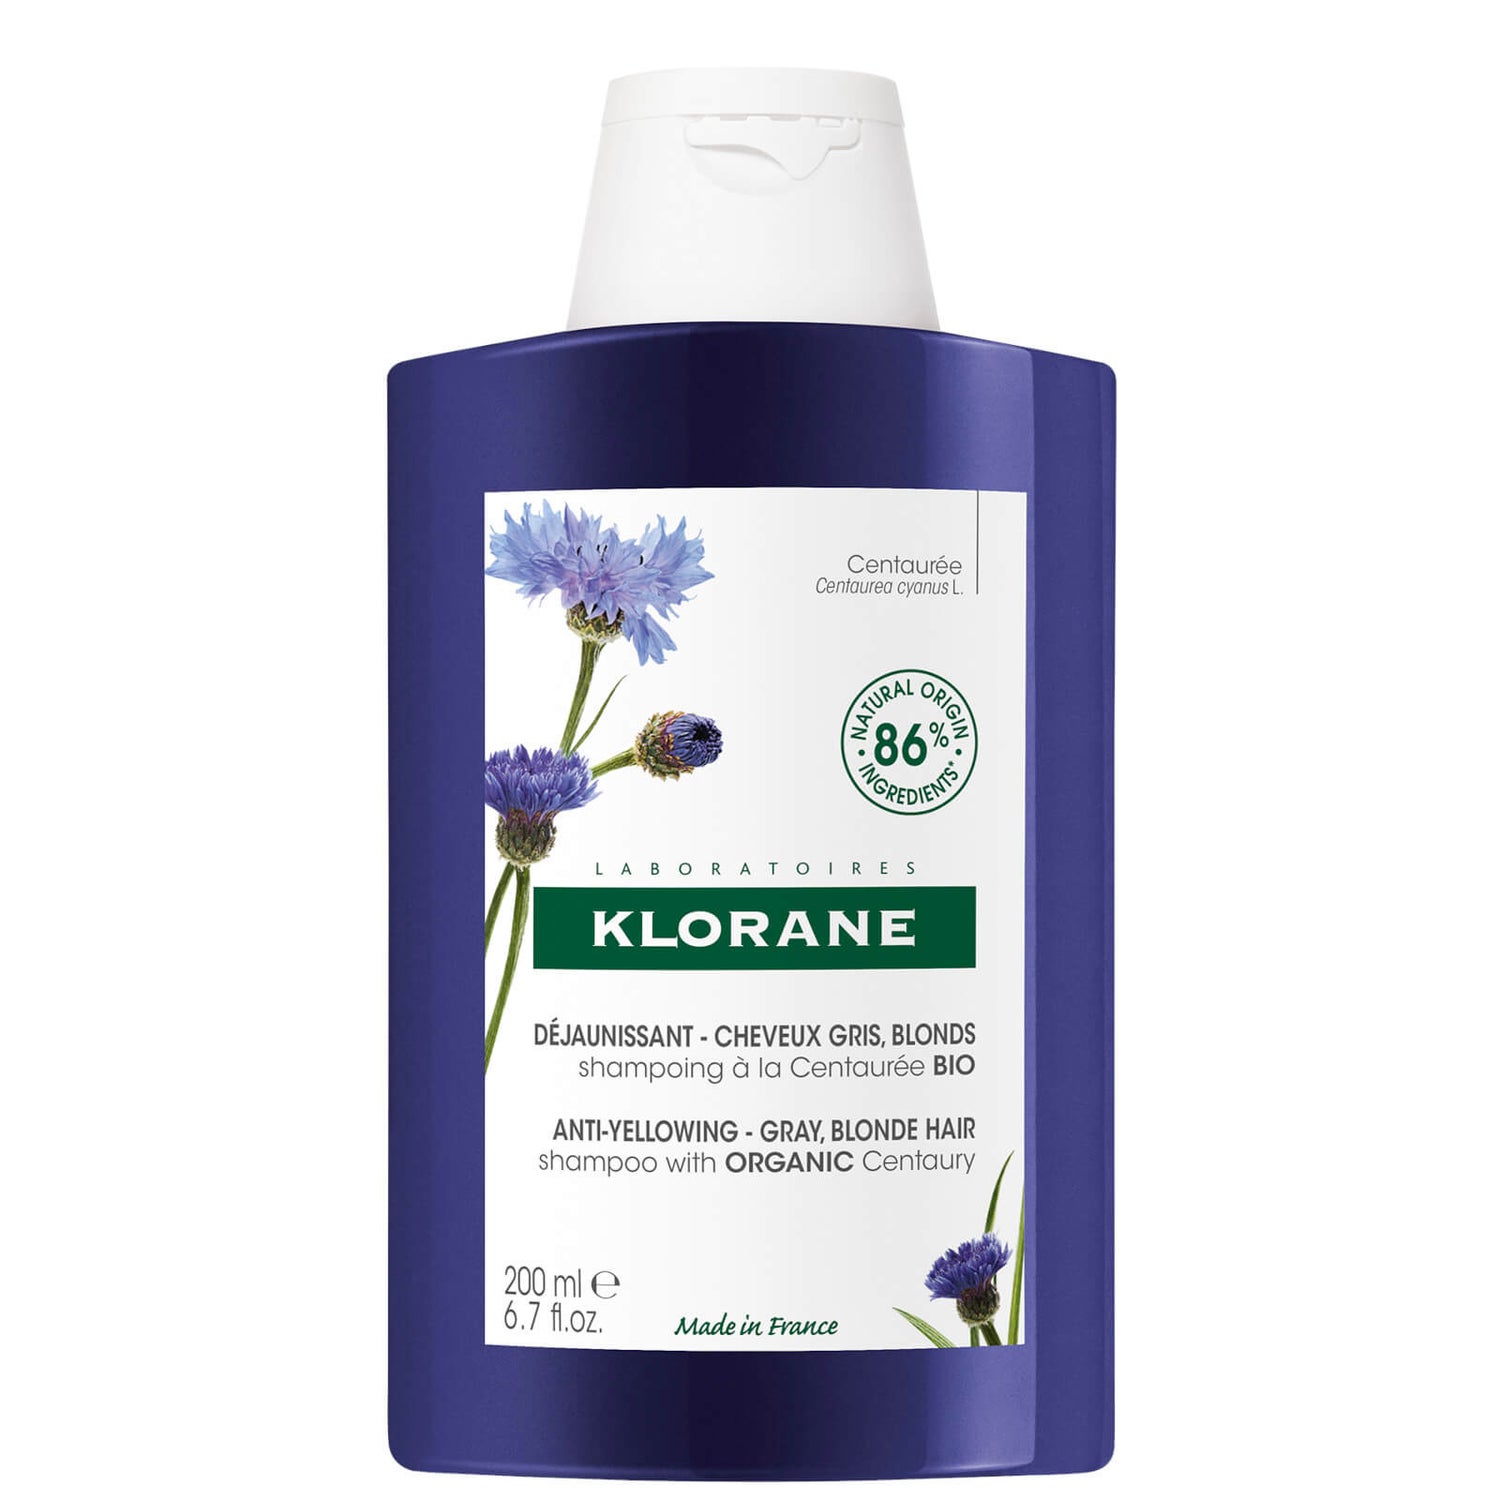 KLORANE Anti-yellowing Shampoo with Centaury for White and Grey Hair 200ml